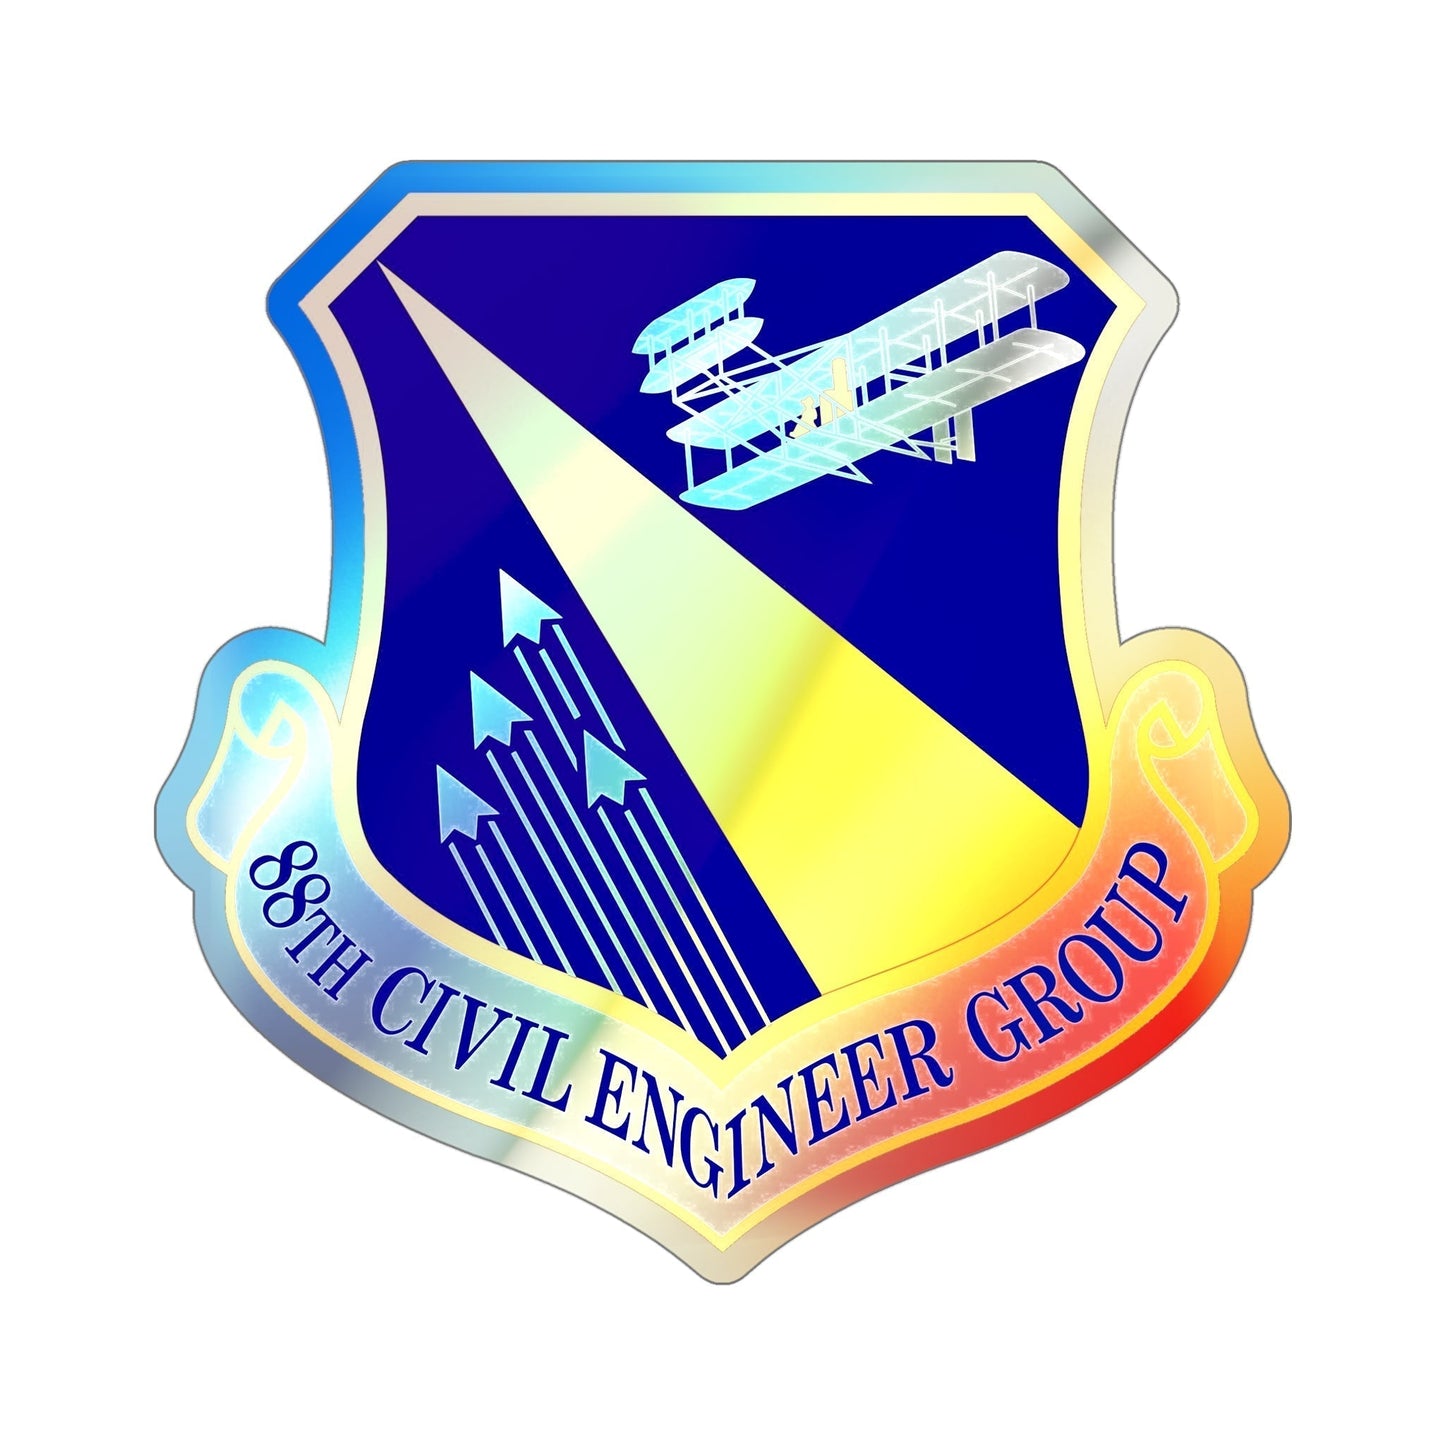 88 Civil Engineer Group AFMC (U.S. Air Force) Holographic STICKER Die-Cut Vinyl Decal-5 Inch-The Sticker Space